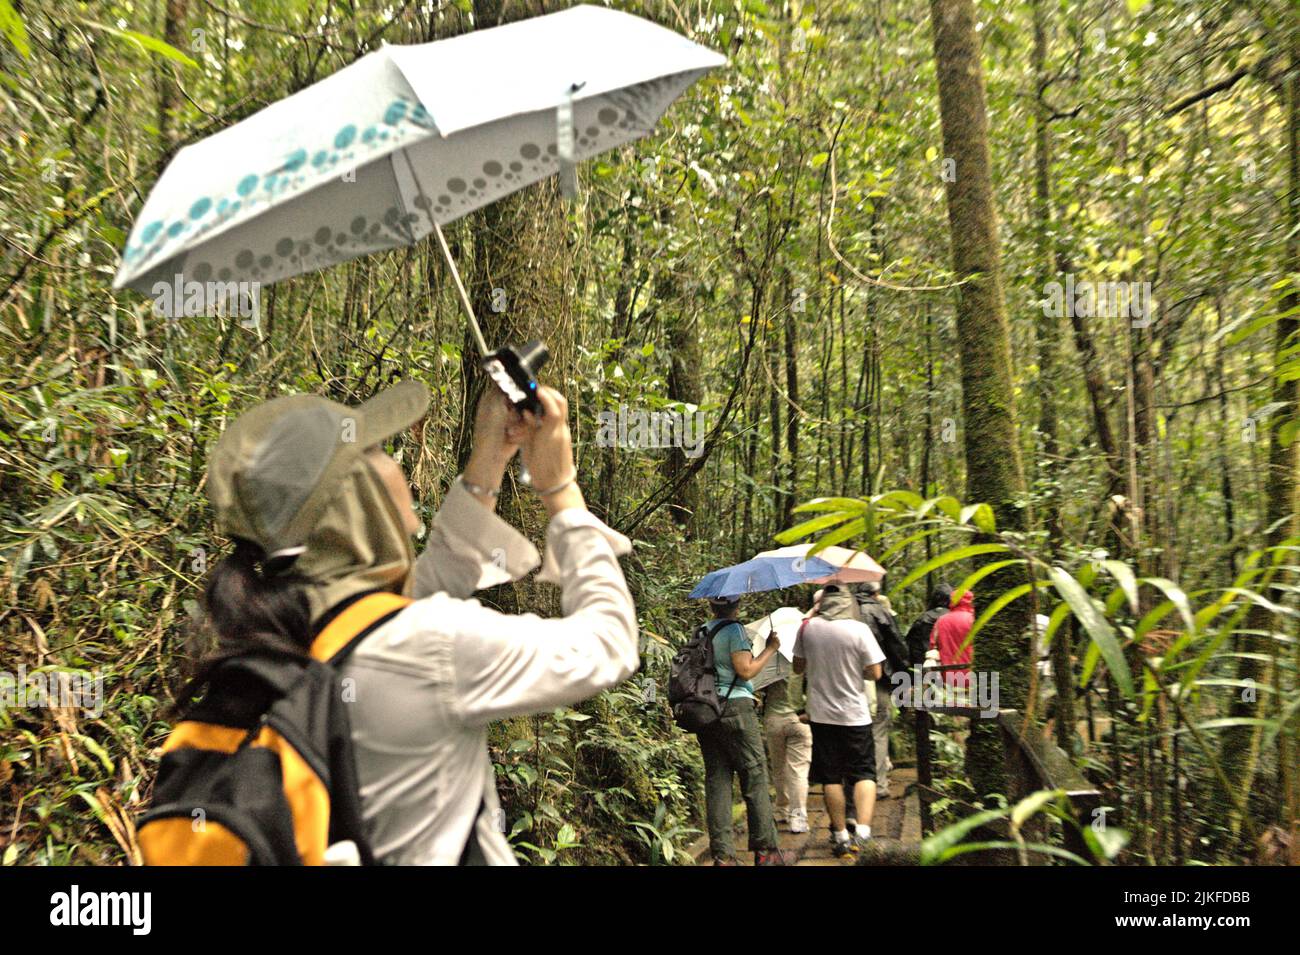 A visitor taking picture while carrying an umbrella, as she is pausing from walking on a trail in the middle of mountain vegetation at Mount Kinabalu Botanical Garden in Kinabalu Park, Ranau, Sabah, Malaysia. Stock Photo